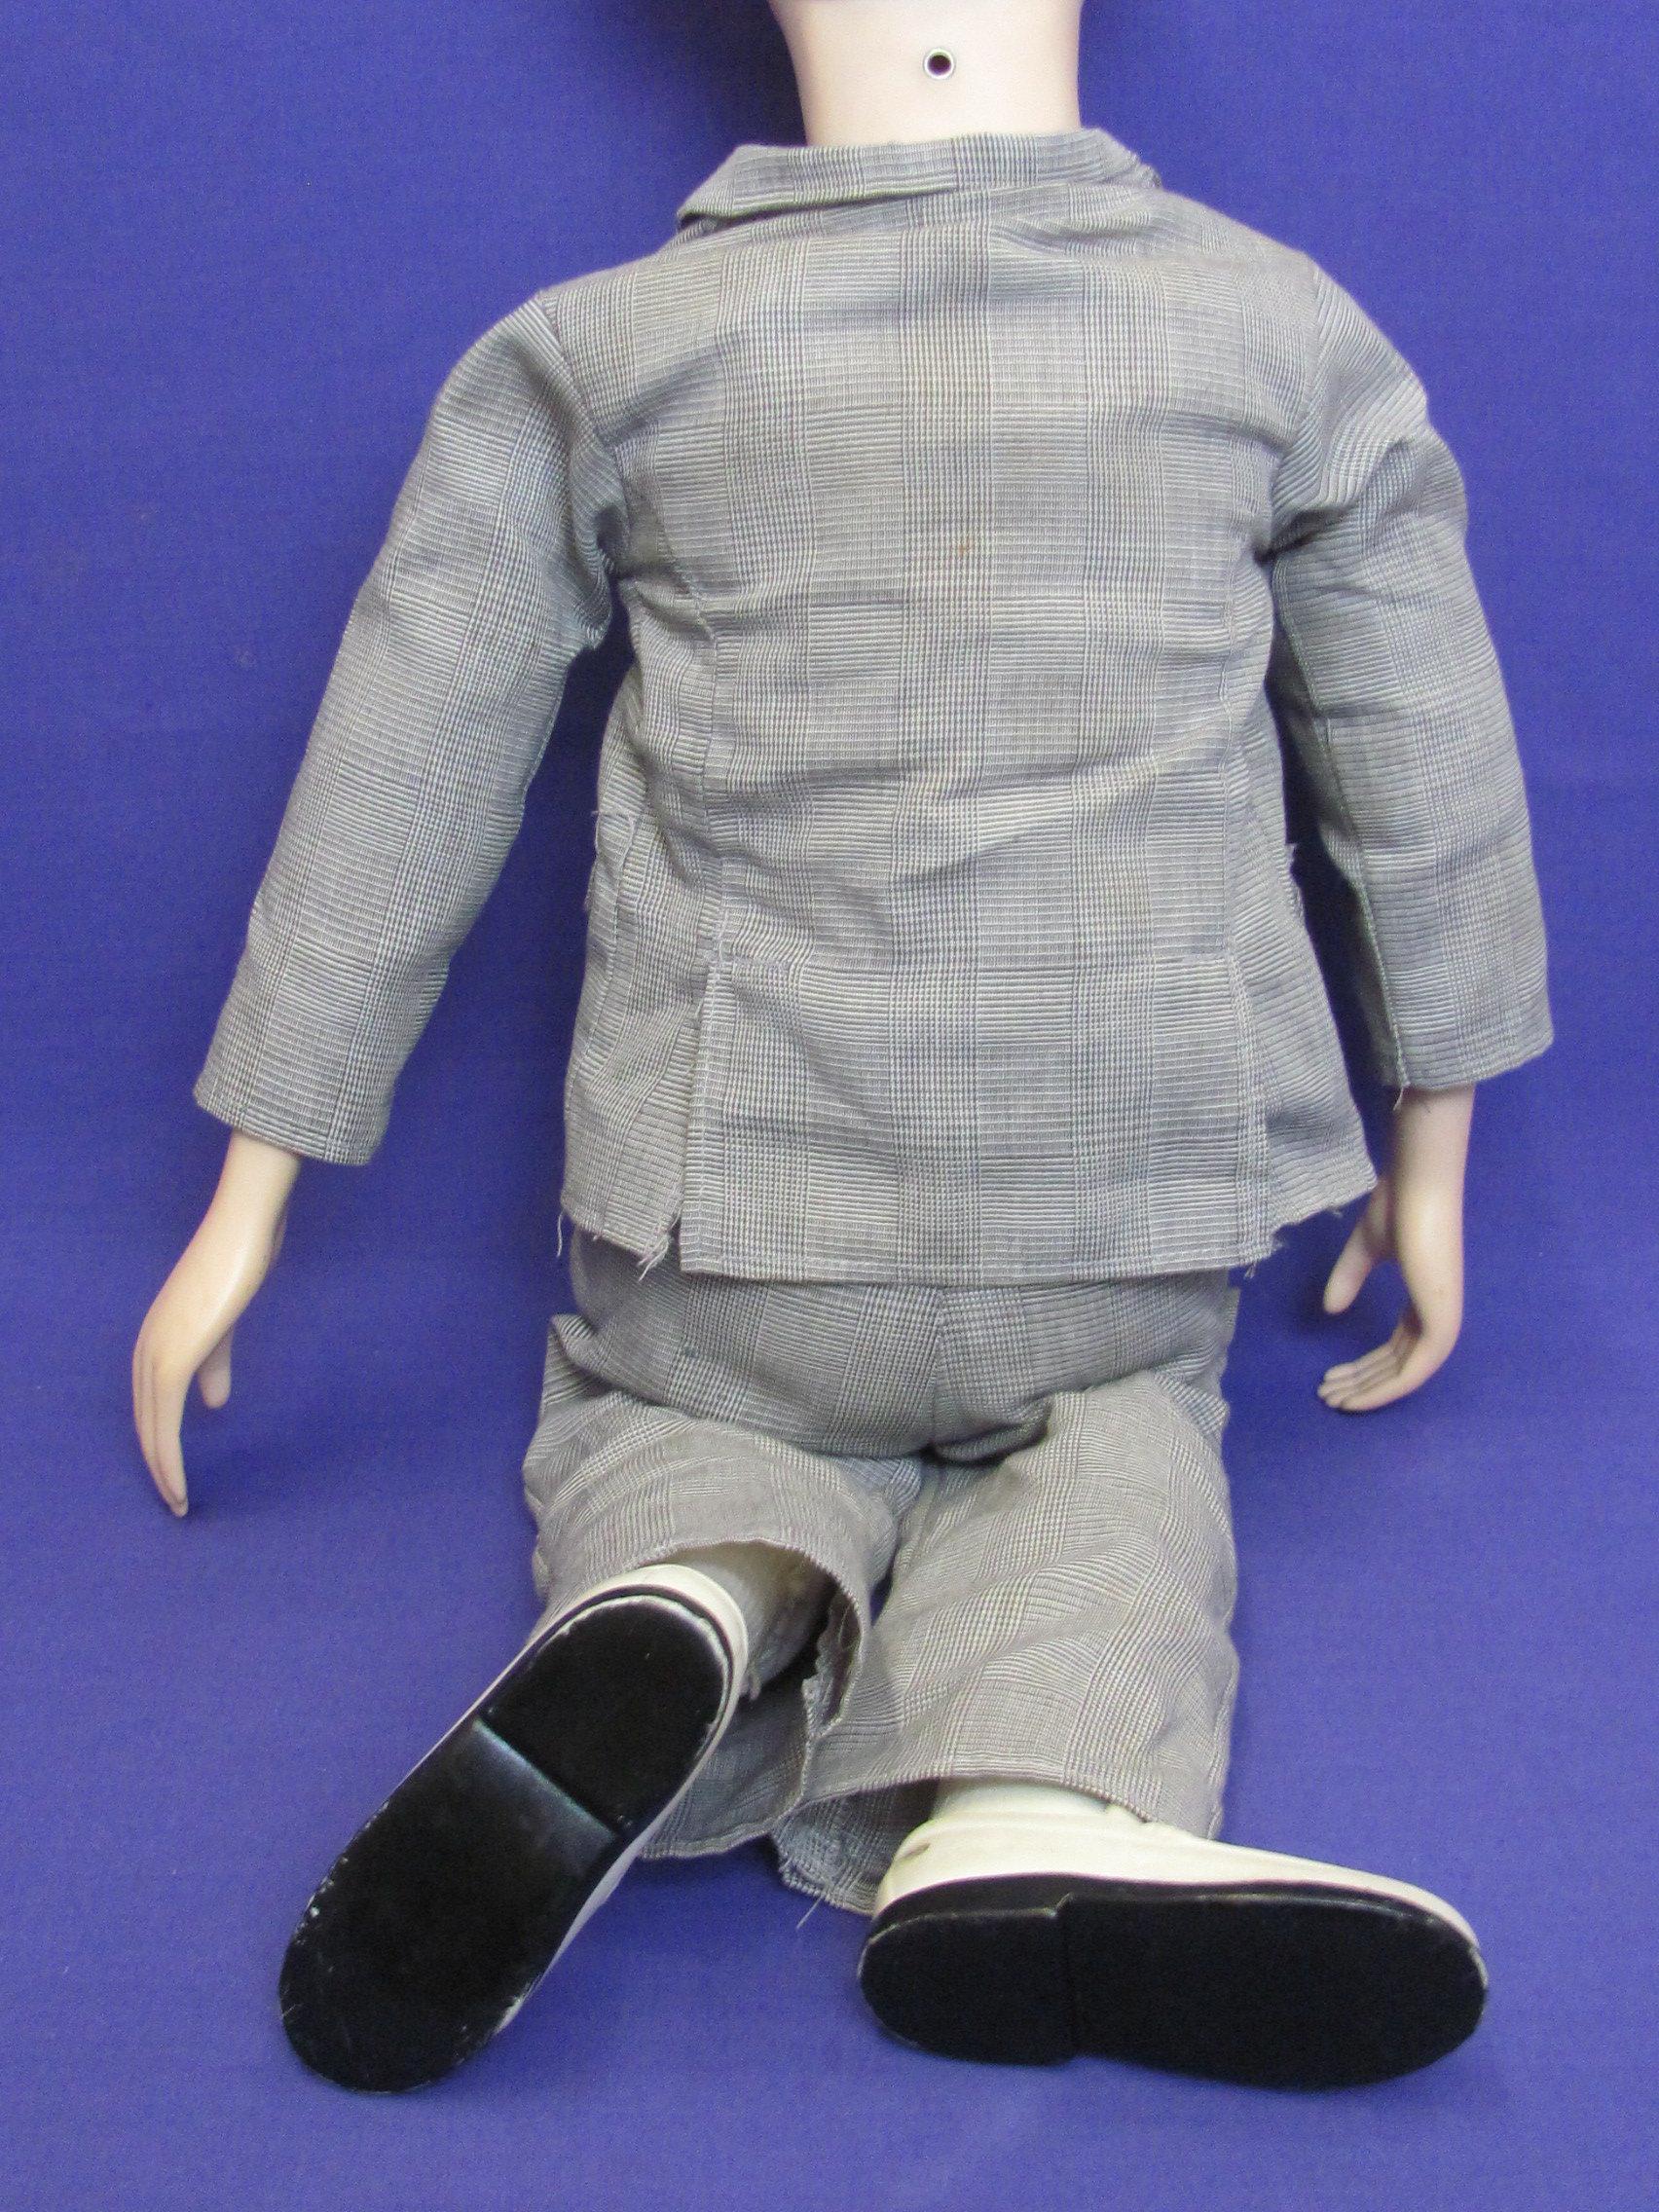 Peewee Herman Ventriloquist Doll – Missing cord to pull mouth – 24” long – Some wear